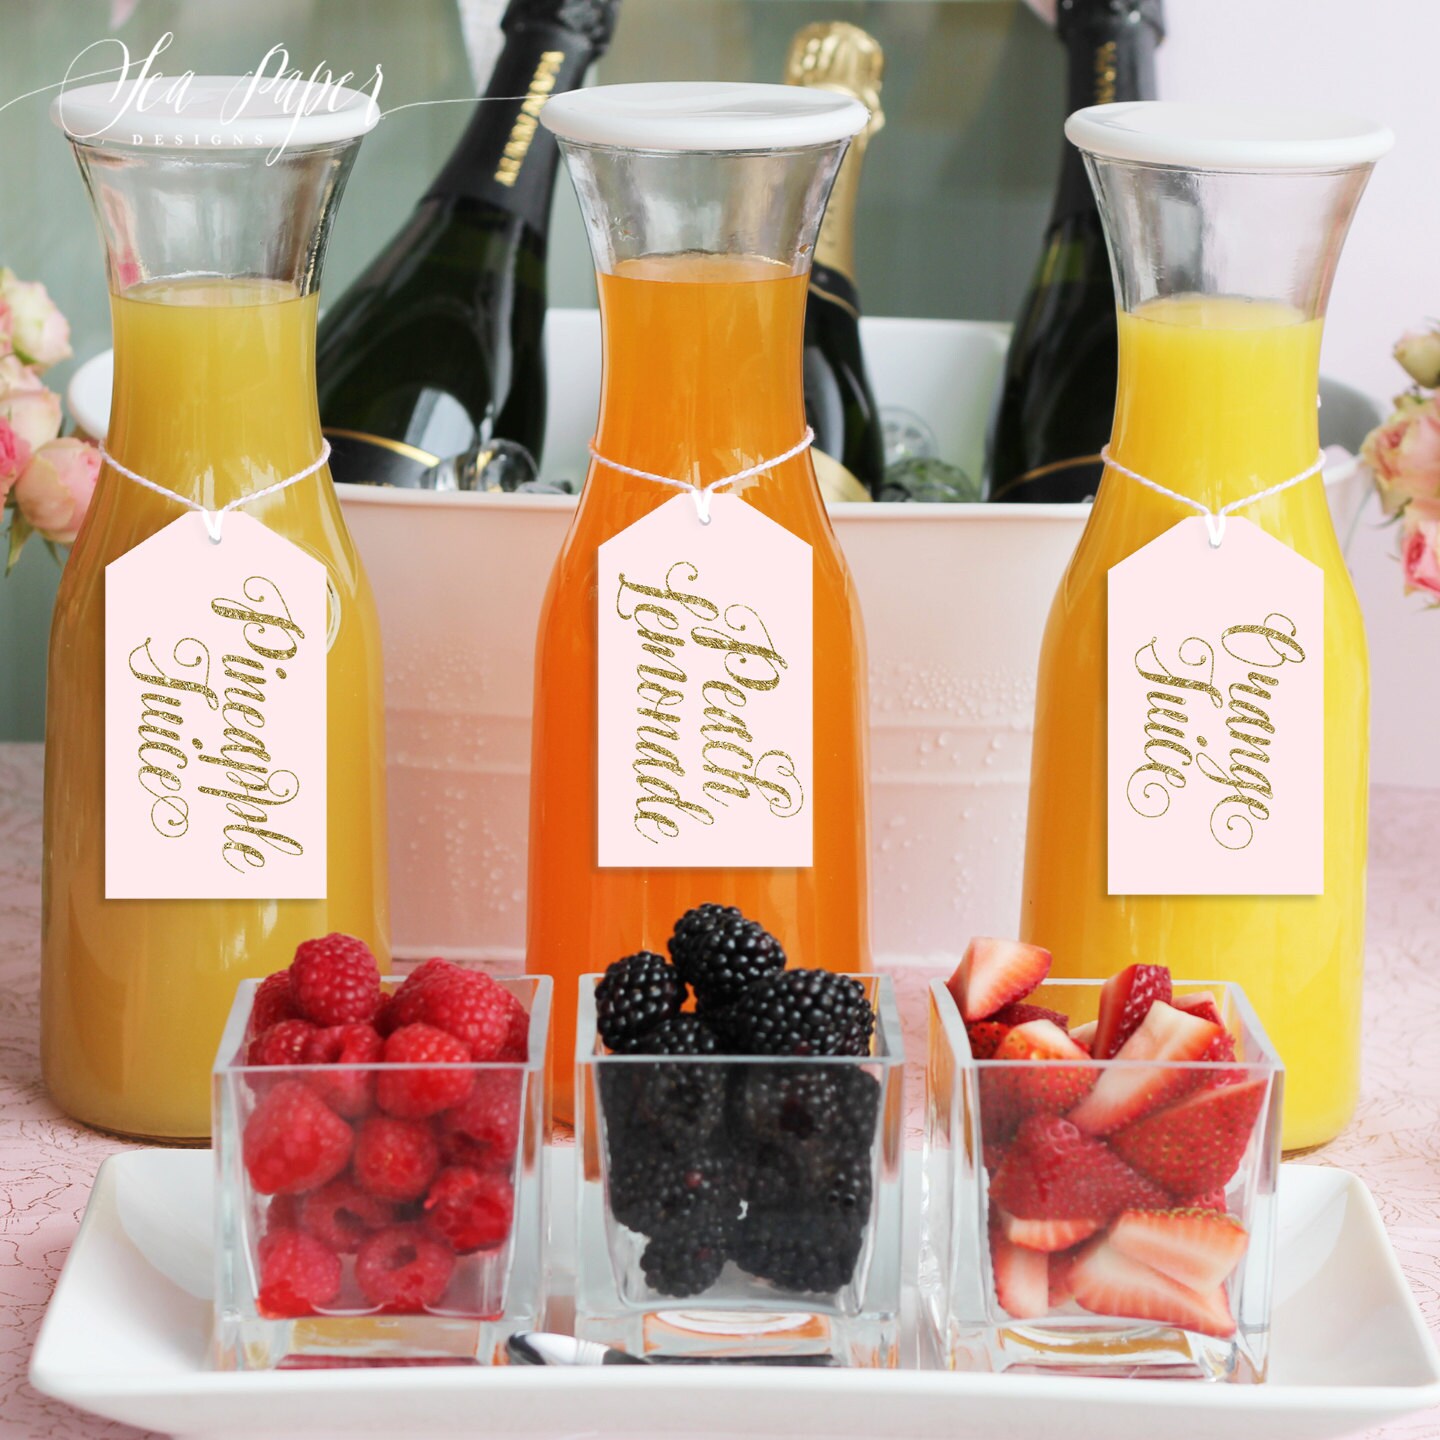  NETANY Carafe Set for Mimosa Bar Includes 4 Pack Glass Carafe  with Lids, 1 Mimosa Bar Sign, 8 Table Cards, 8 Label Tags and 1 Gold Marker  for Bridal/Baby Shower and